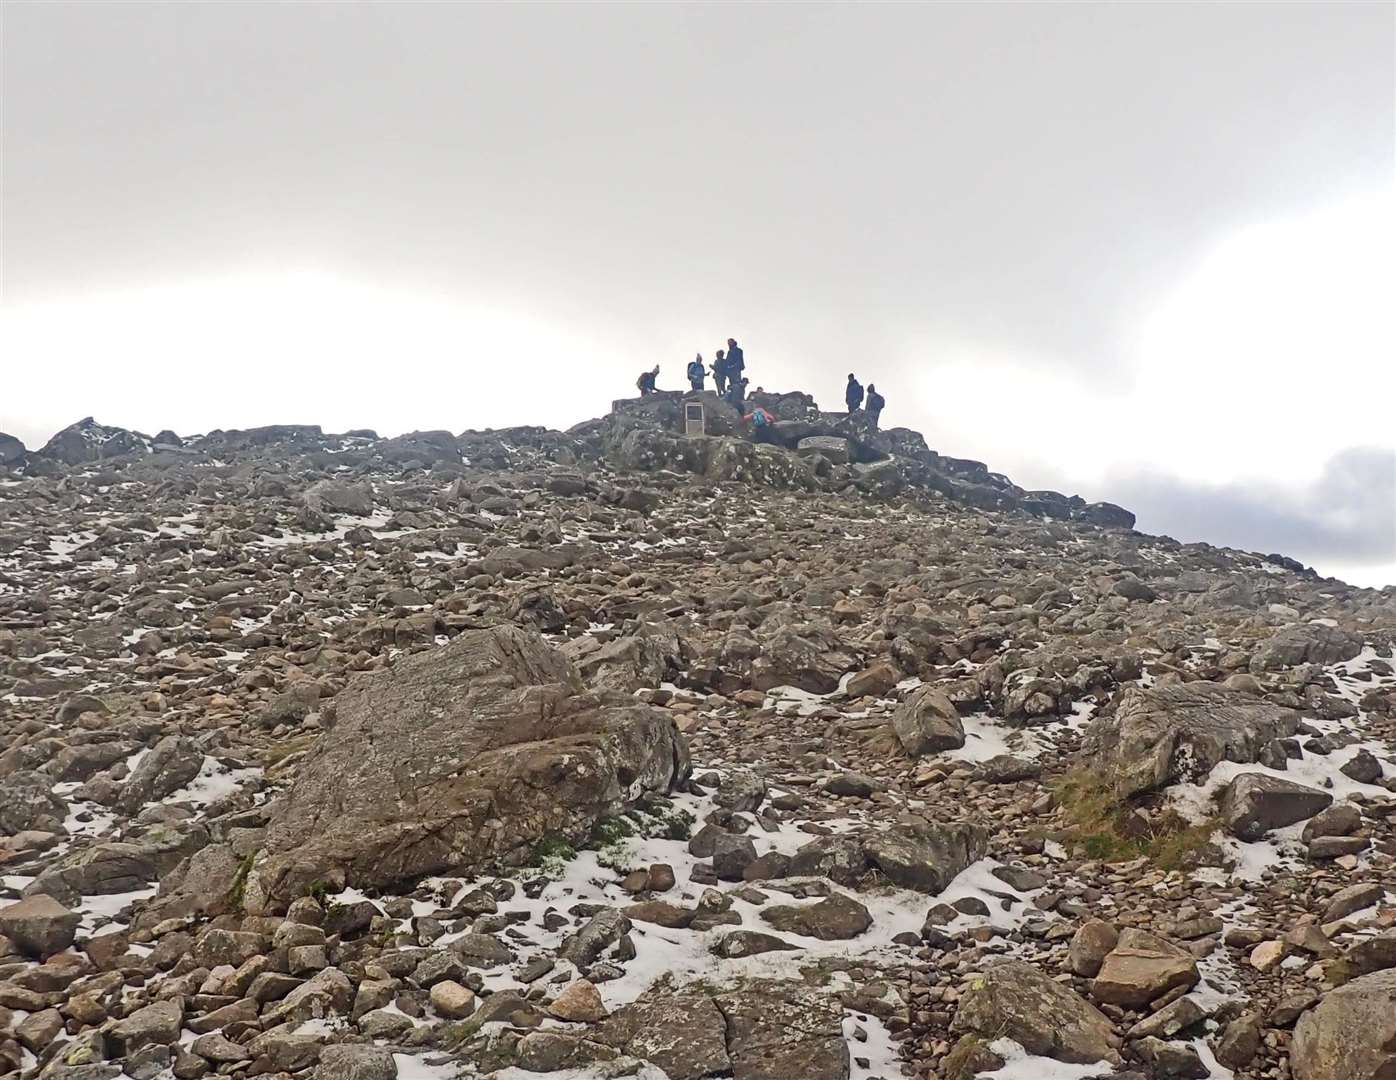 The summit of Great Gable.